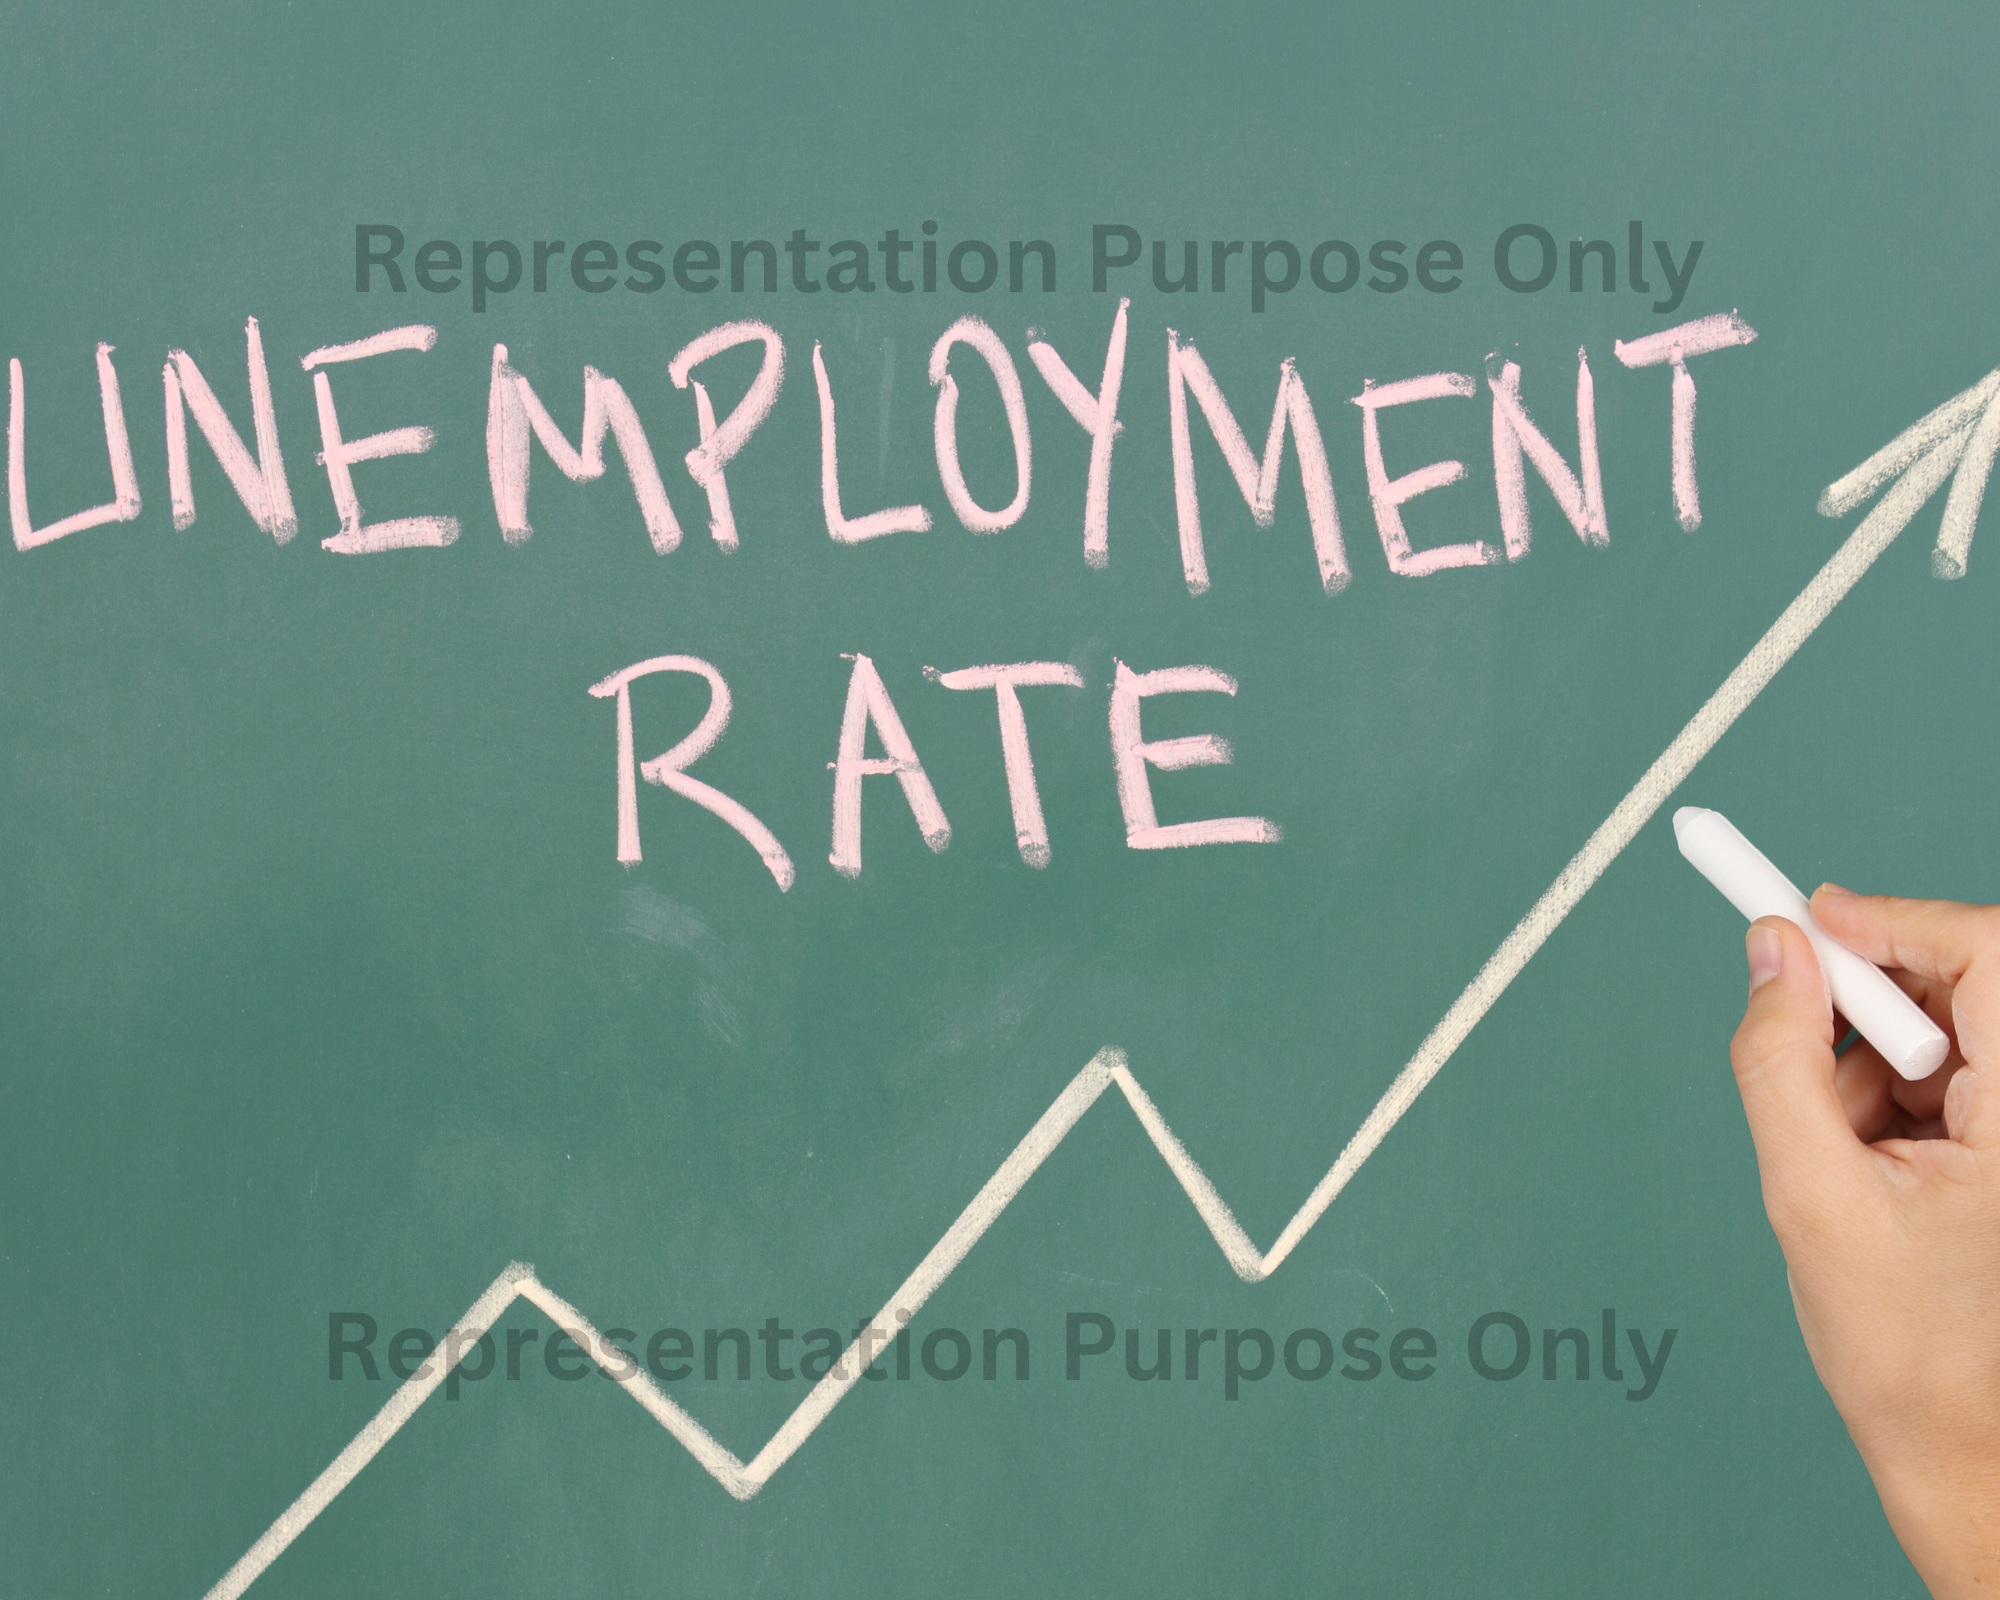 Unemployment Rate in New Zealand: A Closer Look